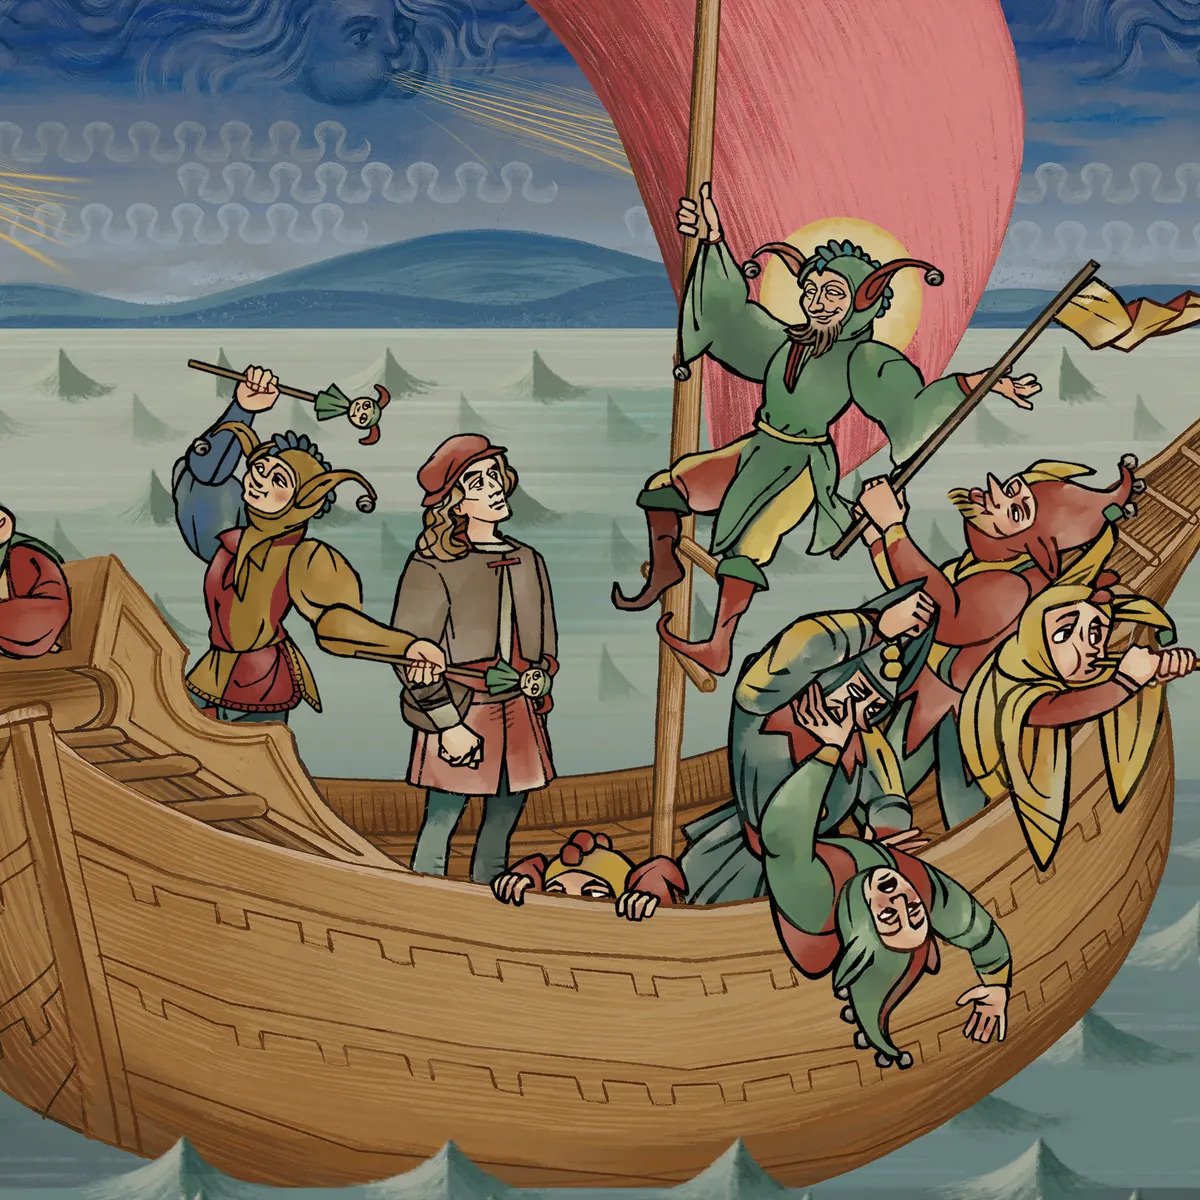 Andreas stands on a ship, looking up at a jester-like character holding the mast, in Pentiment. The game’s art looks like a late medieval manuscript.